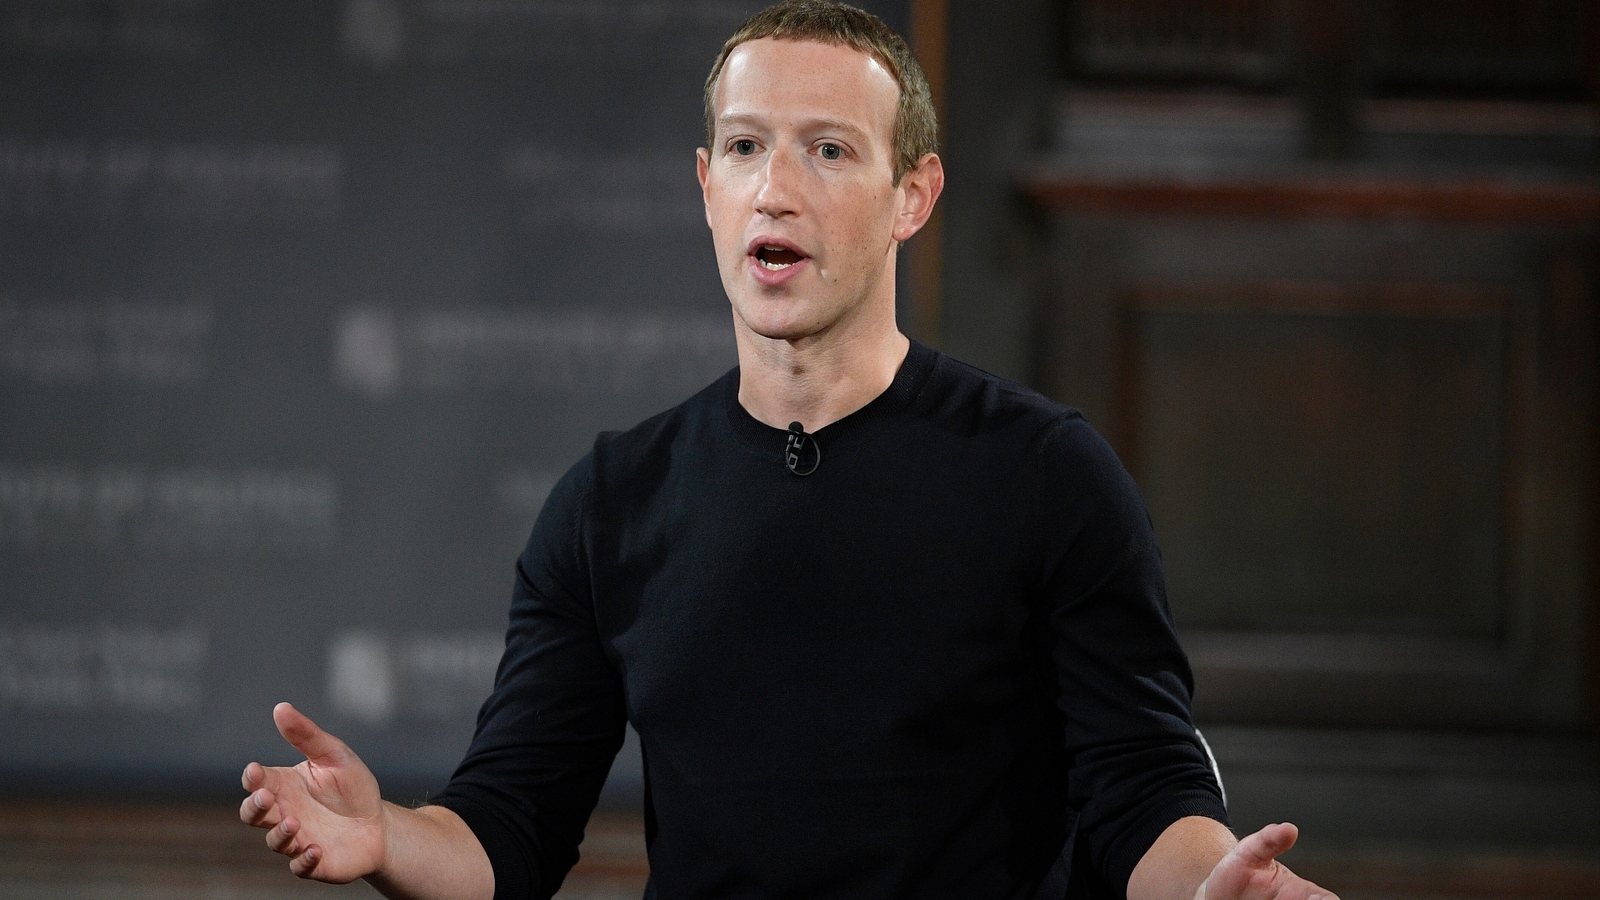 Meta Connect 2023 Mark Zuckerberg to kick off conference with focus on